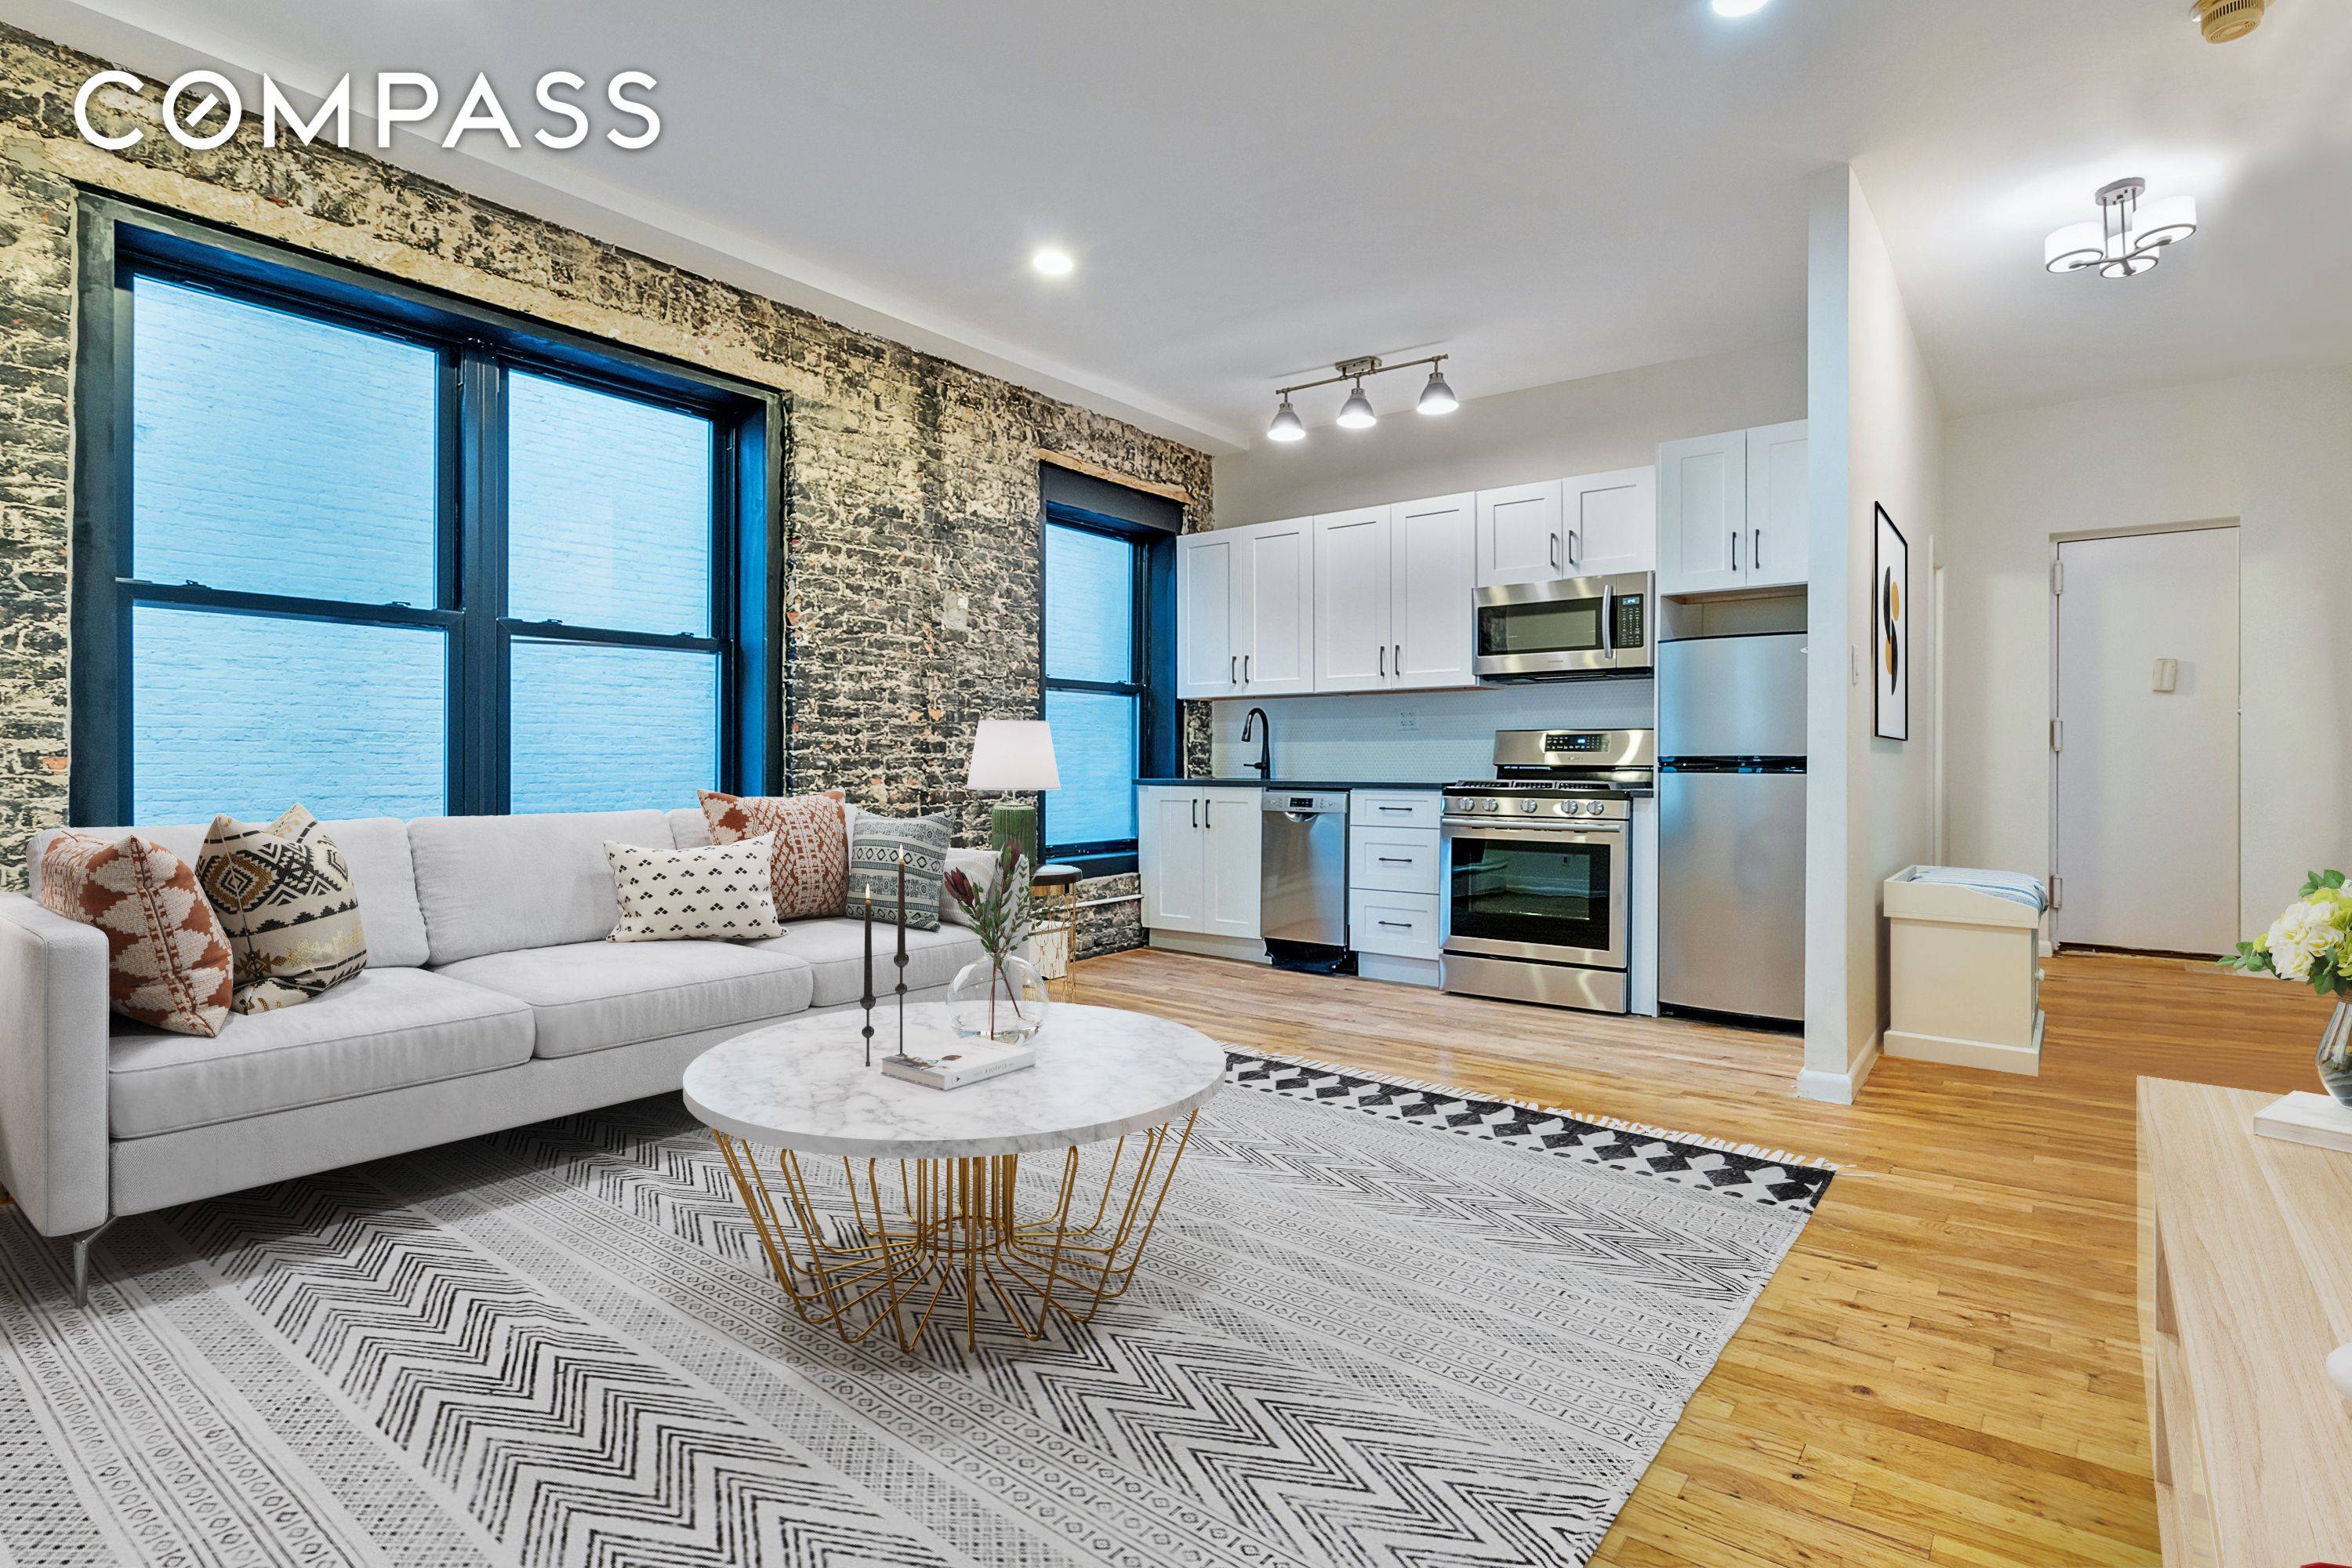 This well designed, move in ready 2 bedroom, loft style home will charm you instantly with its high ceilings, large windows, exposed brick, oak flooring and expansive layout.